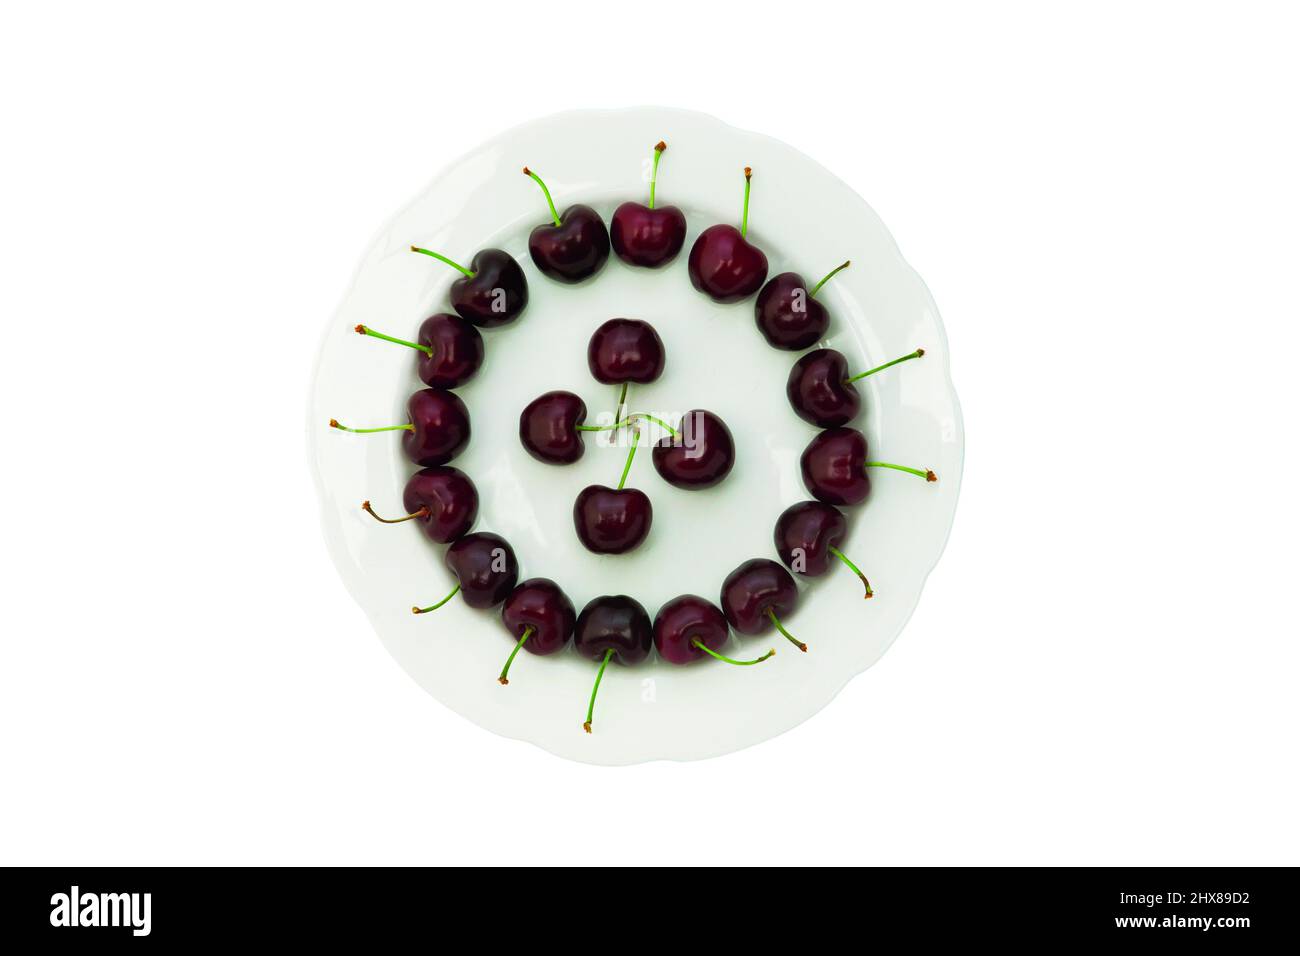 Cherries on a plate Stock Photo